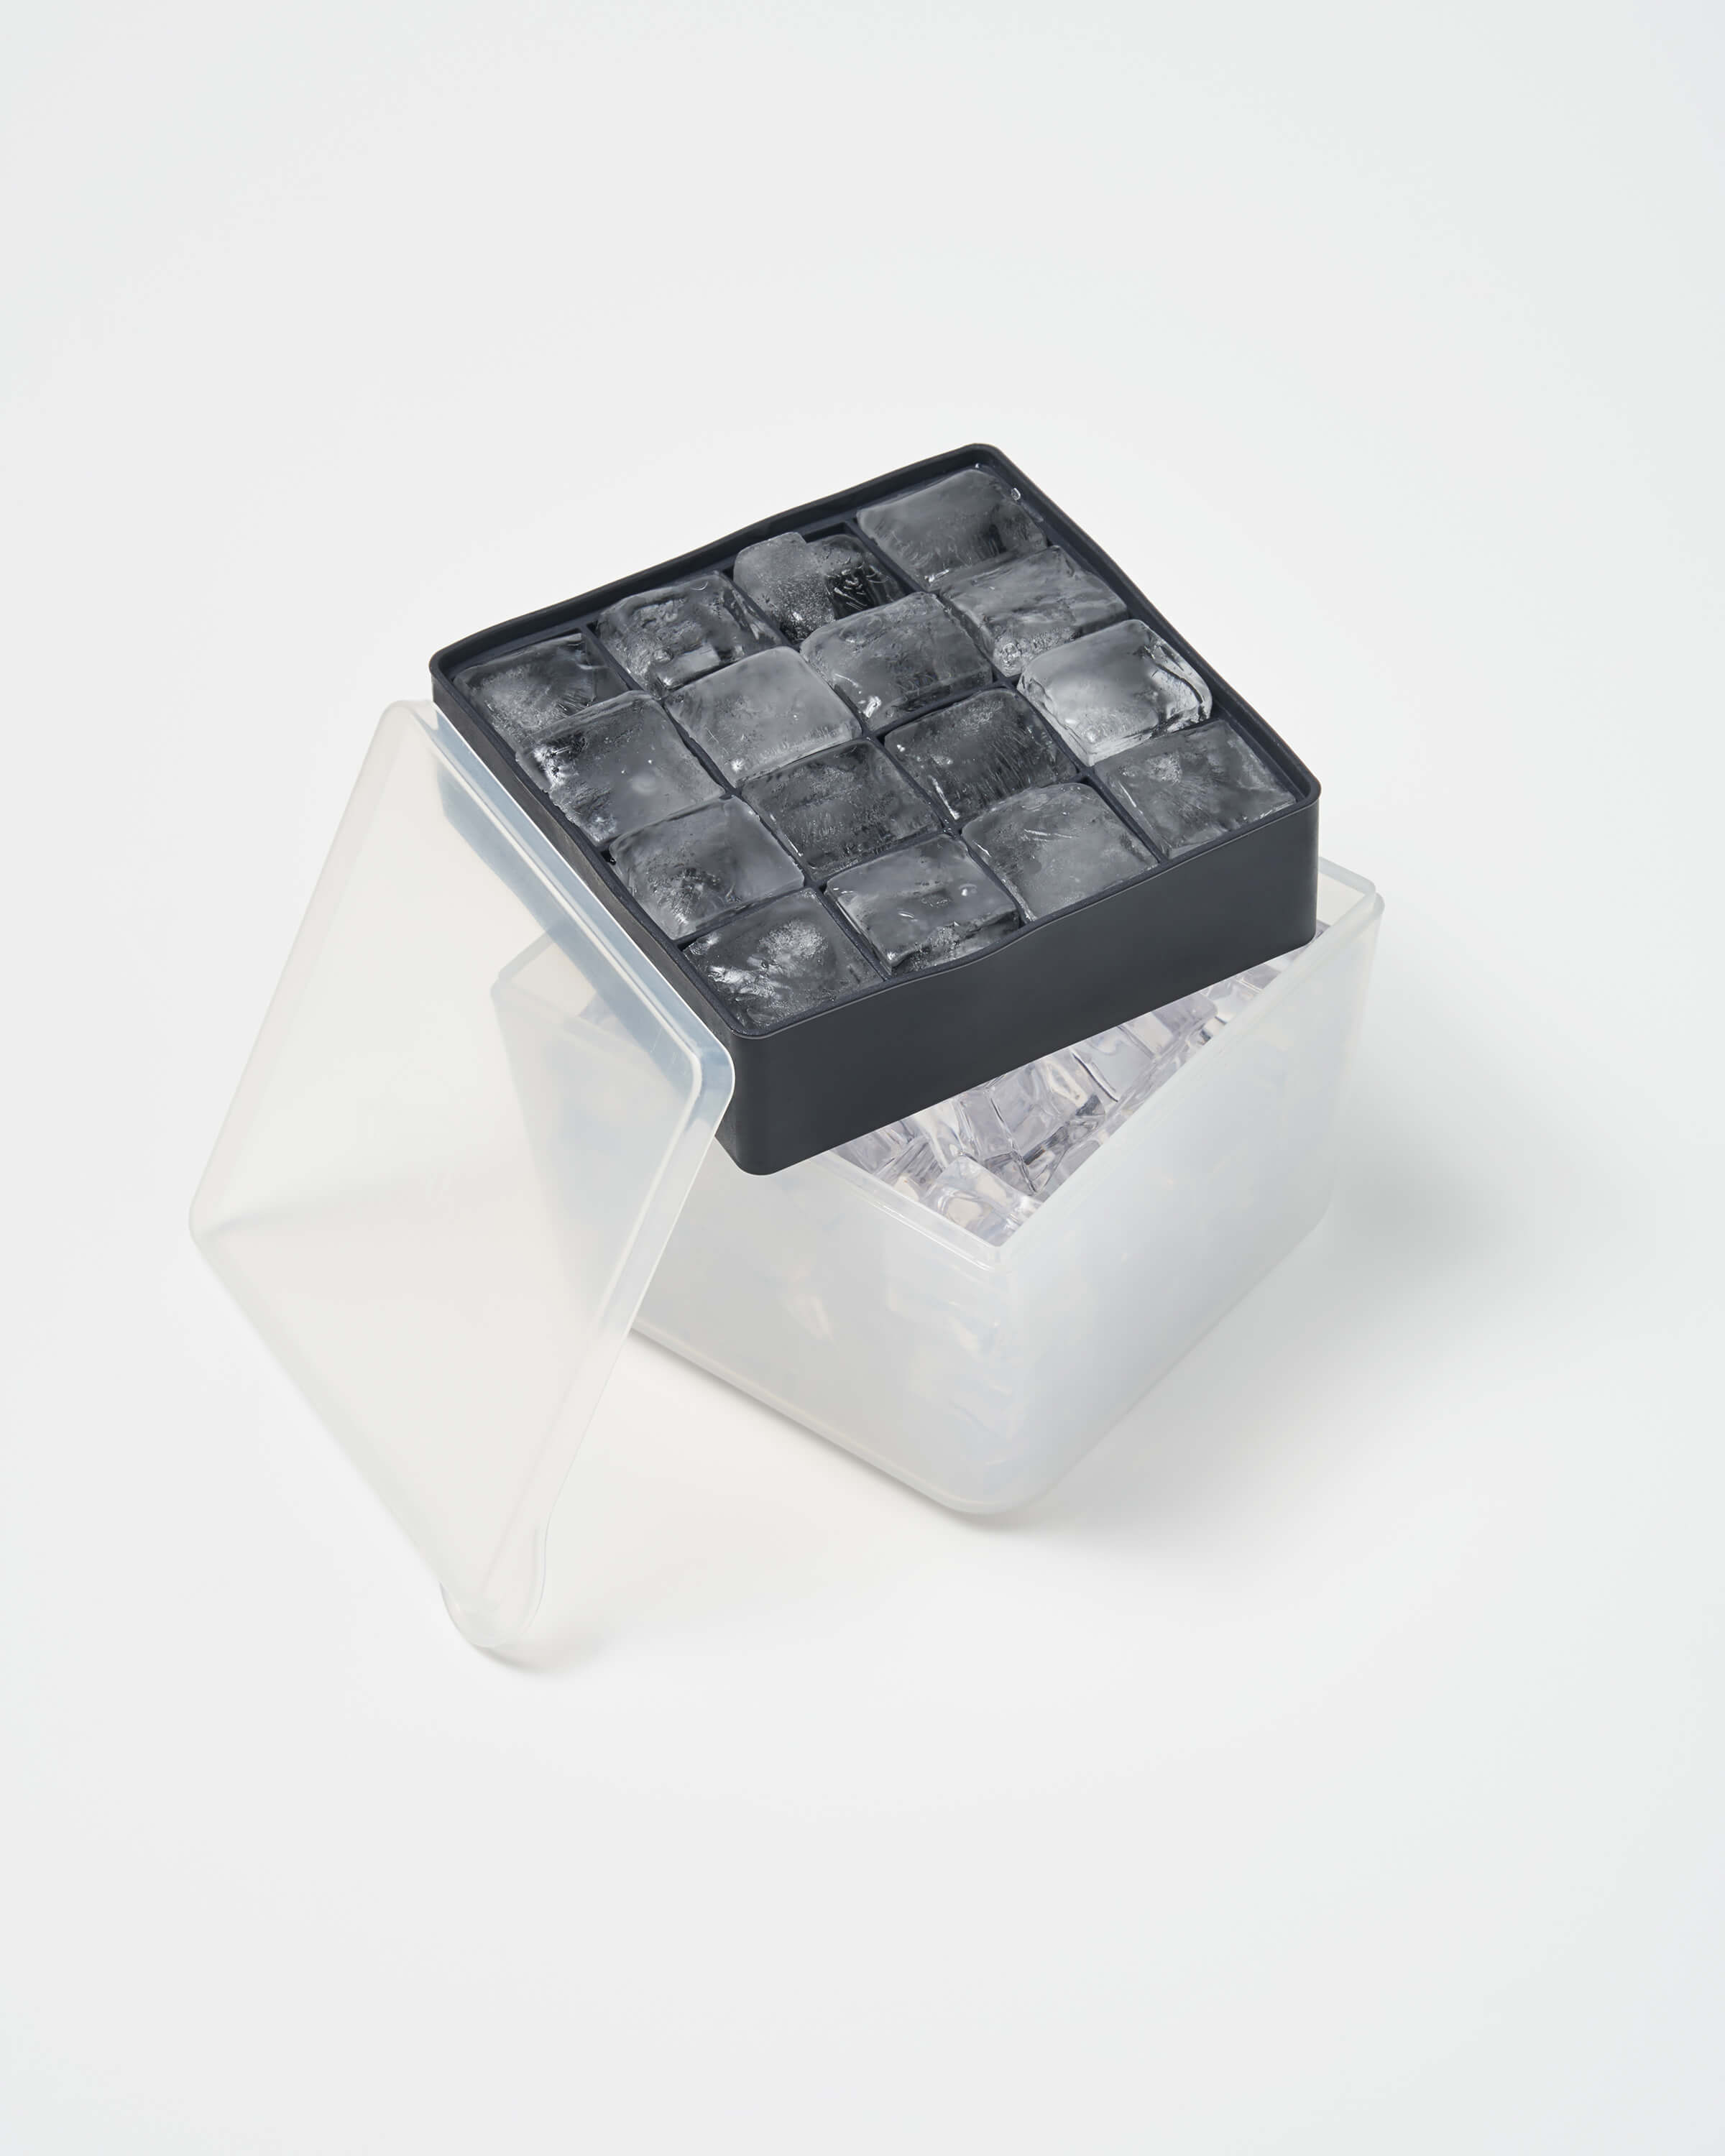 W&P Cup Cubes Freezer Tray - 4 Cubes, Charcoal